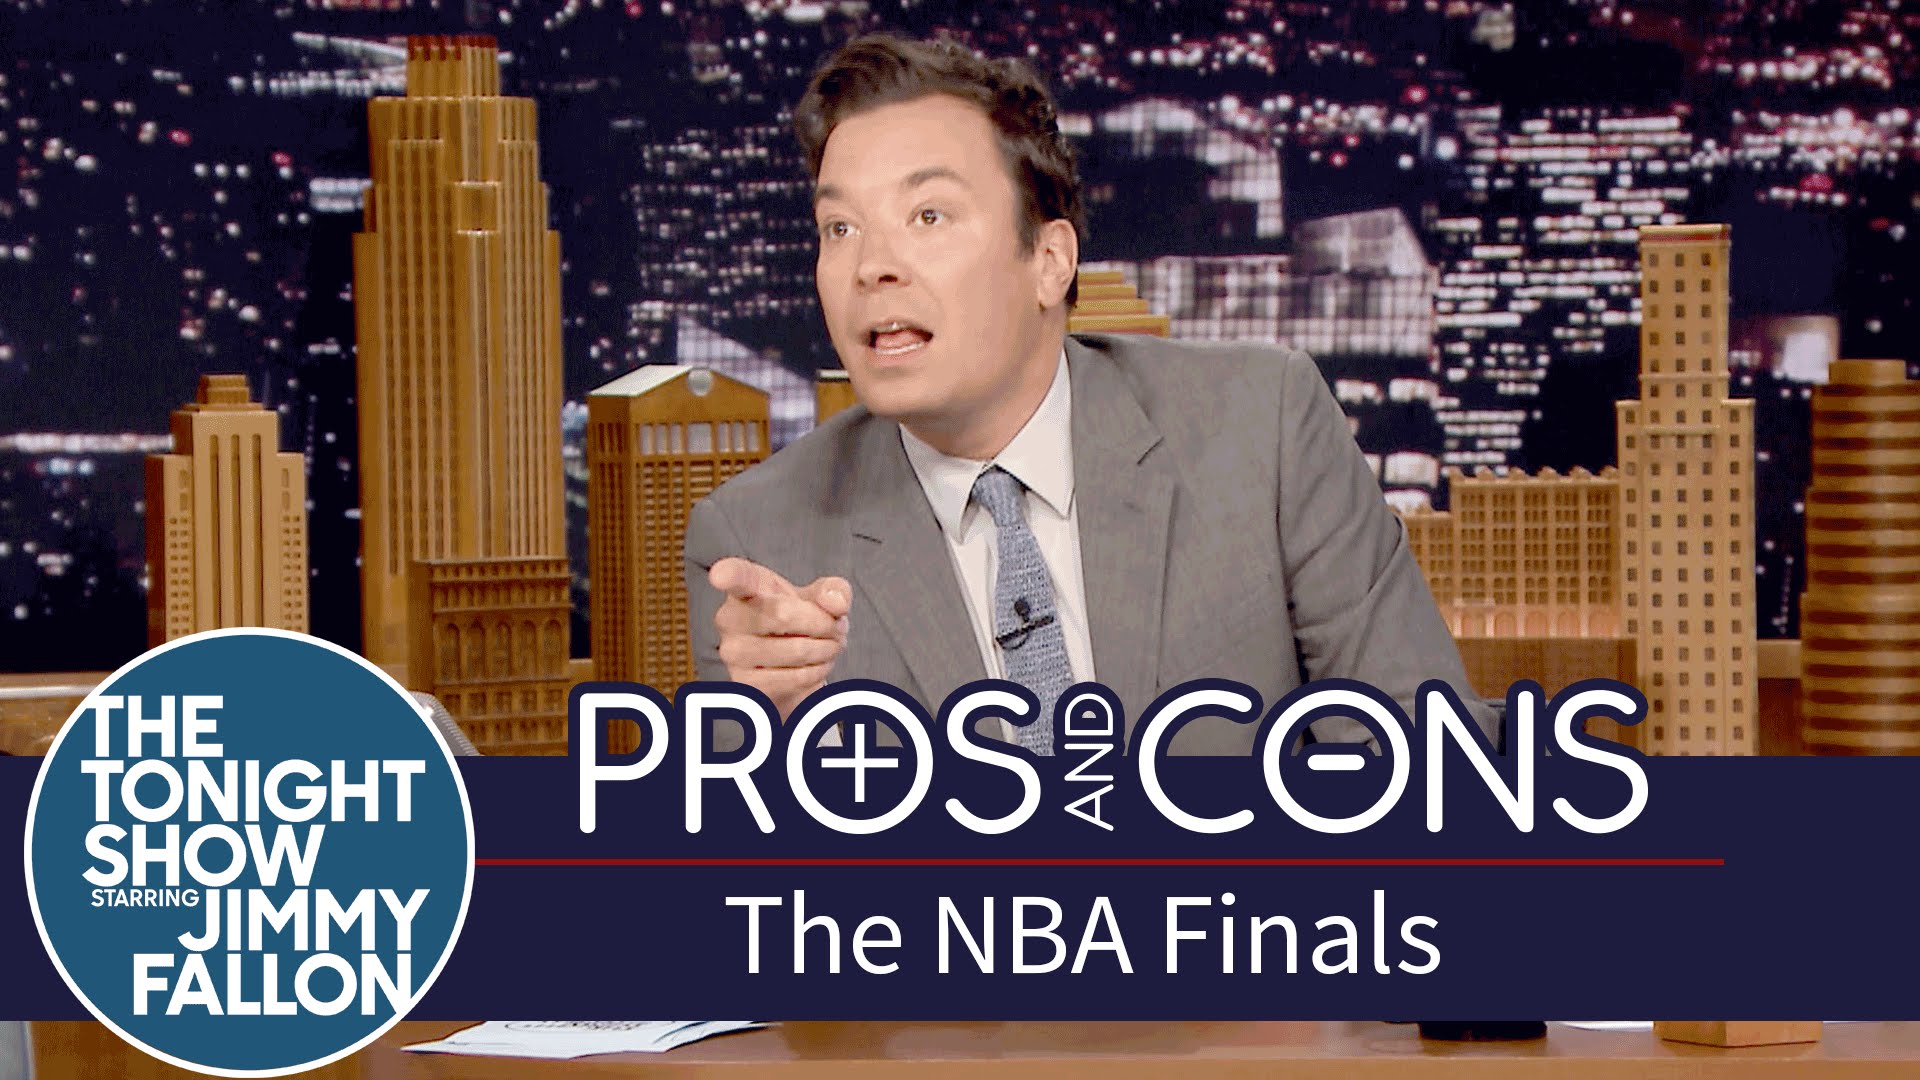 Jimmy Fallon breaks down the pros and cons of this year's NBA Finals